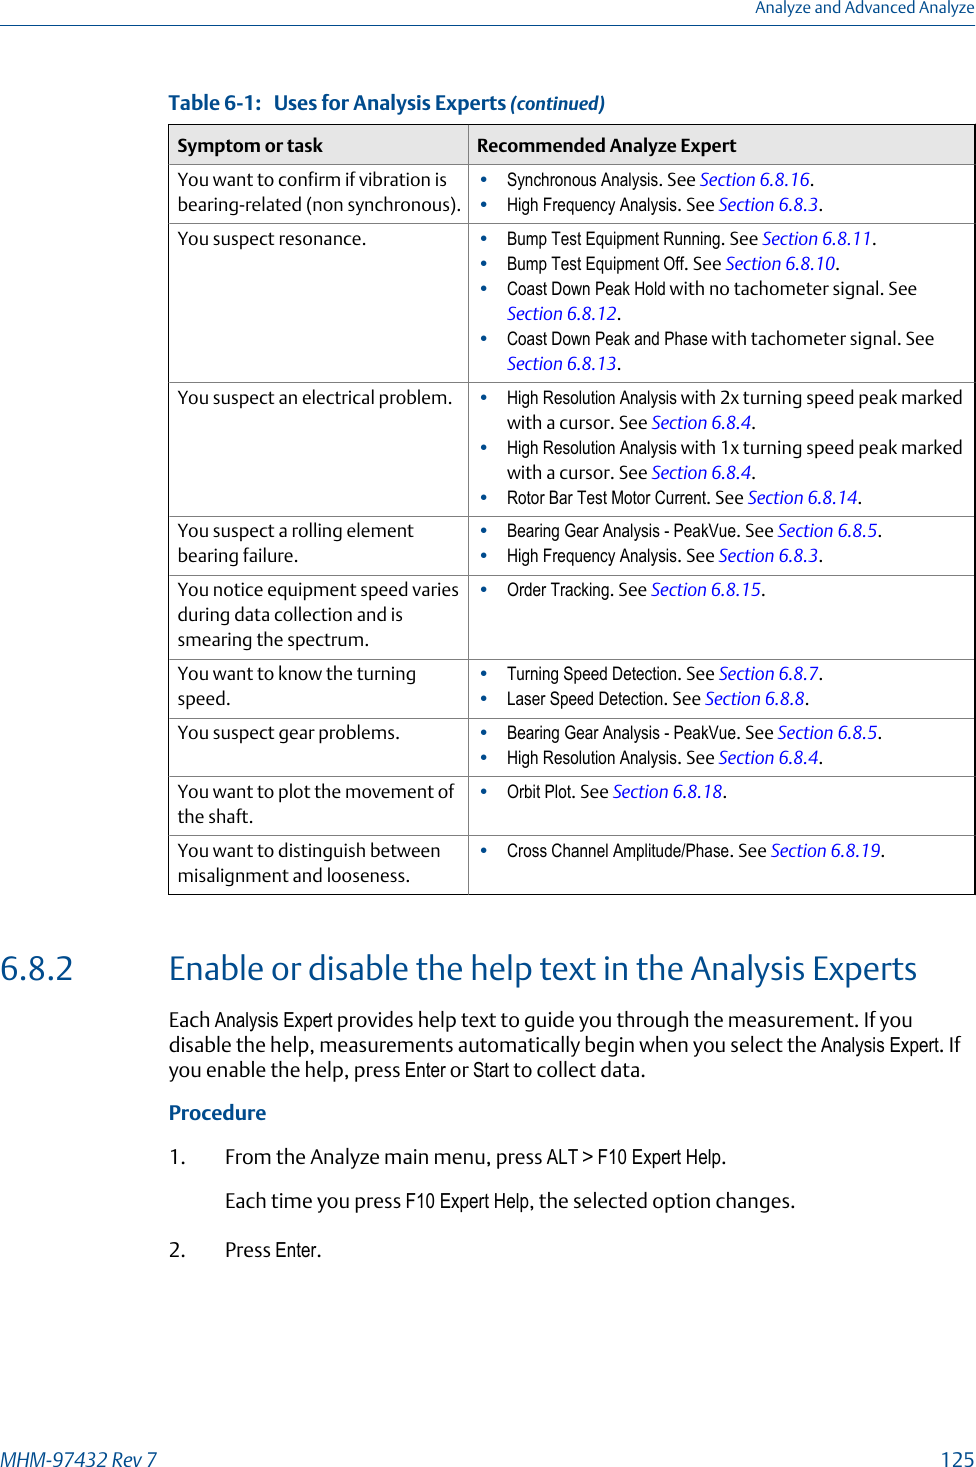 Uses for Analysis Experts (continued)Table 6-1:   Symptom or task Recommended Analyze ExpertYou want to confirm if vibration isbearing-related (non synchronous).•Synchronous Analysis. See Section 6.8.16.•High Frequency Analysis. See Section 6.8.3.You suspect resonance. •Bump Test Equipment Running. See Section 6.8.11.•Bump Test Equipment Off. See Section 6.8.10.•Coast Down Peak Hold with no tachometer signal. See Section 6.8.12.•Coast Down Peak and Phase with tachometer signal. See Section 6.8.13.You suspect an electrical problem. •High Resolution Analysis with 2x turning speed peak markedwith a cursor. See Section 6.8.4.•High Resolution Analysis with 1x turning speed peak markedwith a cursor. See Section 6.8.4.•Rotor Bar Test Motor Current. See Section 6.8.14.You suspect a rolling elementbearing failure.•Bearing Gear Analysis - PeakVue. See Section 6.8.5.•High Frequency Analysis. See Section 6.8.3.You notice equipment speed variesduring data collection and issmearing the spectrum.•Order Tracking. See Section 6.8.15.You want to know the turningspeed.•Turning Speed Detection. See Section 6.8.7.•Laser Speed Detection. See Section 6.8.8.You suspect gear problems. •Bearing Gear Analysis - PeakVue. See Section 6.8.5.•High Resolution Analysis. See Section 6.8.4.You want to plot the movement ofthe shaft.•Orbit Plot. See Section 6.8.18.You want to distinguish betweenmisalignment and looseness.•Cross Channel Amplitude/Phase. See Section 6.8.19.6.8.2 Enable or disable the help text in the Analysis ExpertsEach Analysis Expert provides help text to guide you through the measurement. If youdisable the help, measurements automatically begin when you select the Analysis Expert. Ifyou enable the help, press Enter or Start to collect data.Procedure1. From the Analyze main menu, press ALT &gt; F10 Expert Help.Each time you press F10 Expert Help, the selected option changes.2. Press Enter.Analyze and Advanced AnalyzeMHM-97432 Rev 7  125